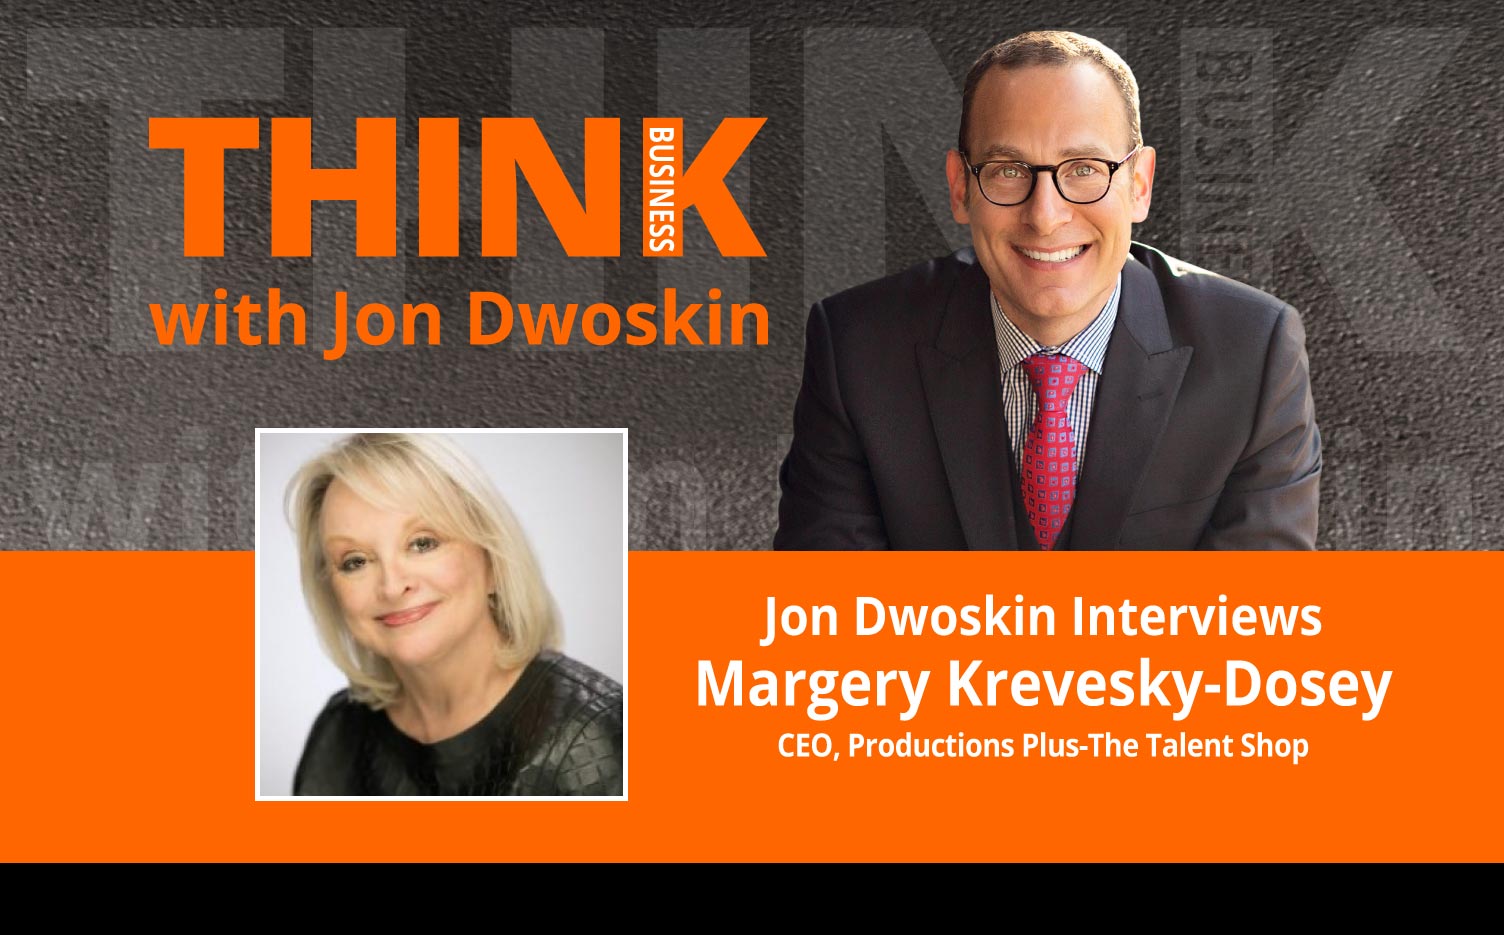 THINK Business Podcast: Jon Dwoskin Interviews Margery Krevesky-Dosey, CEO, Productions Plus-The Talent Shop